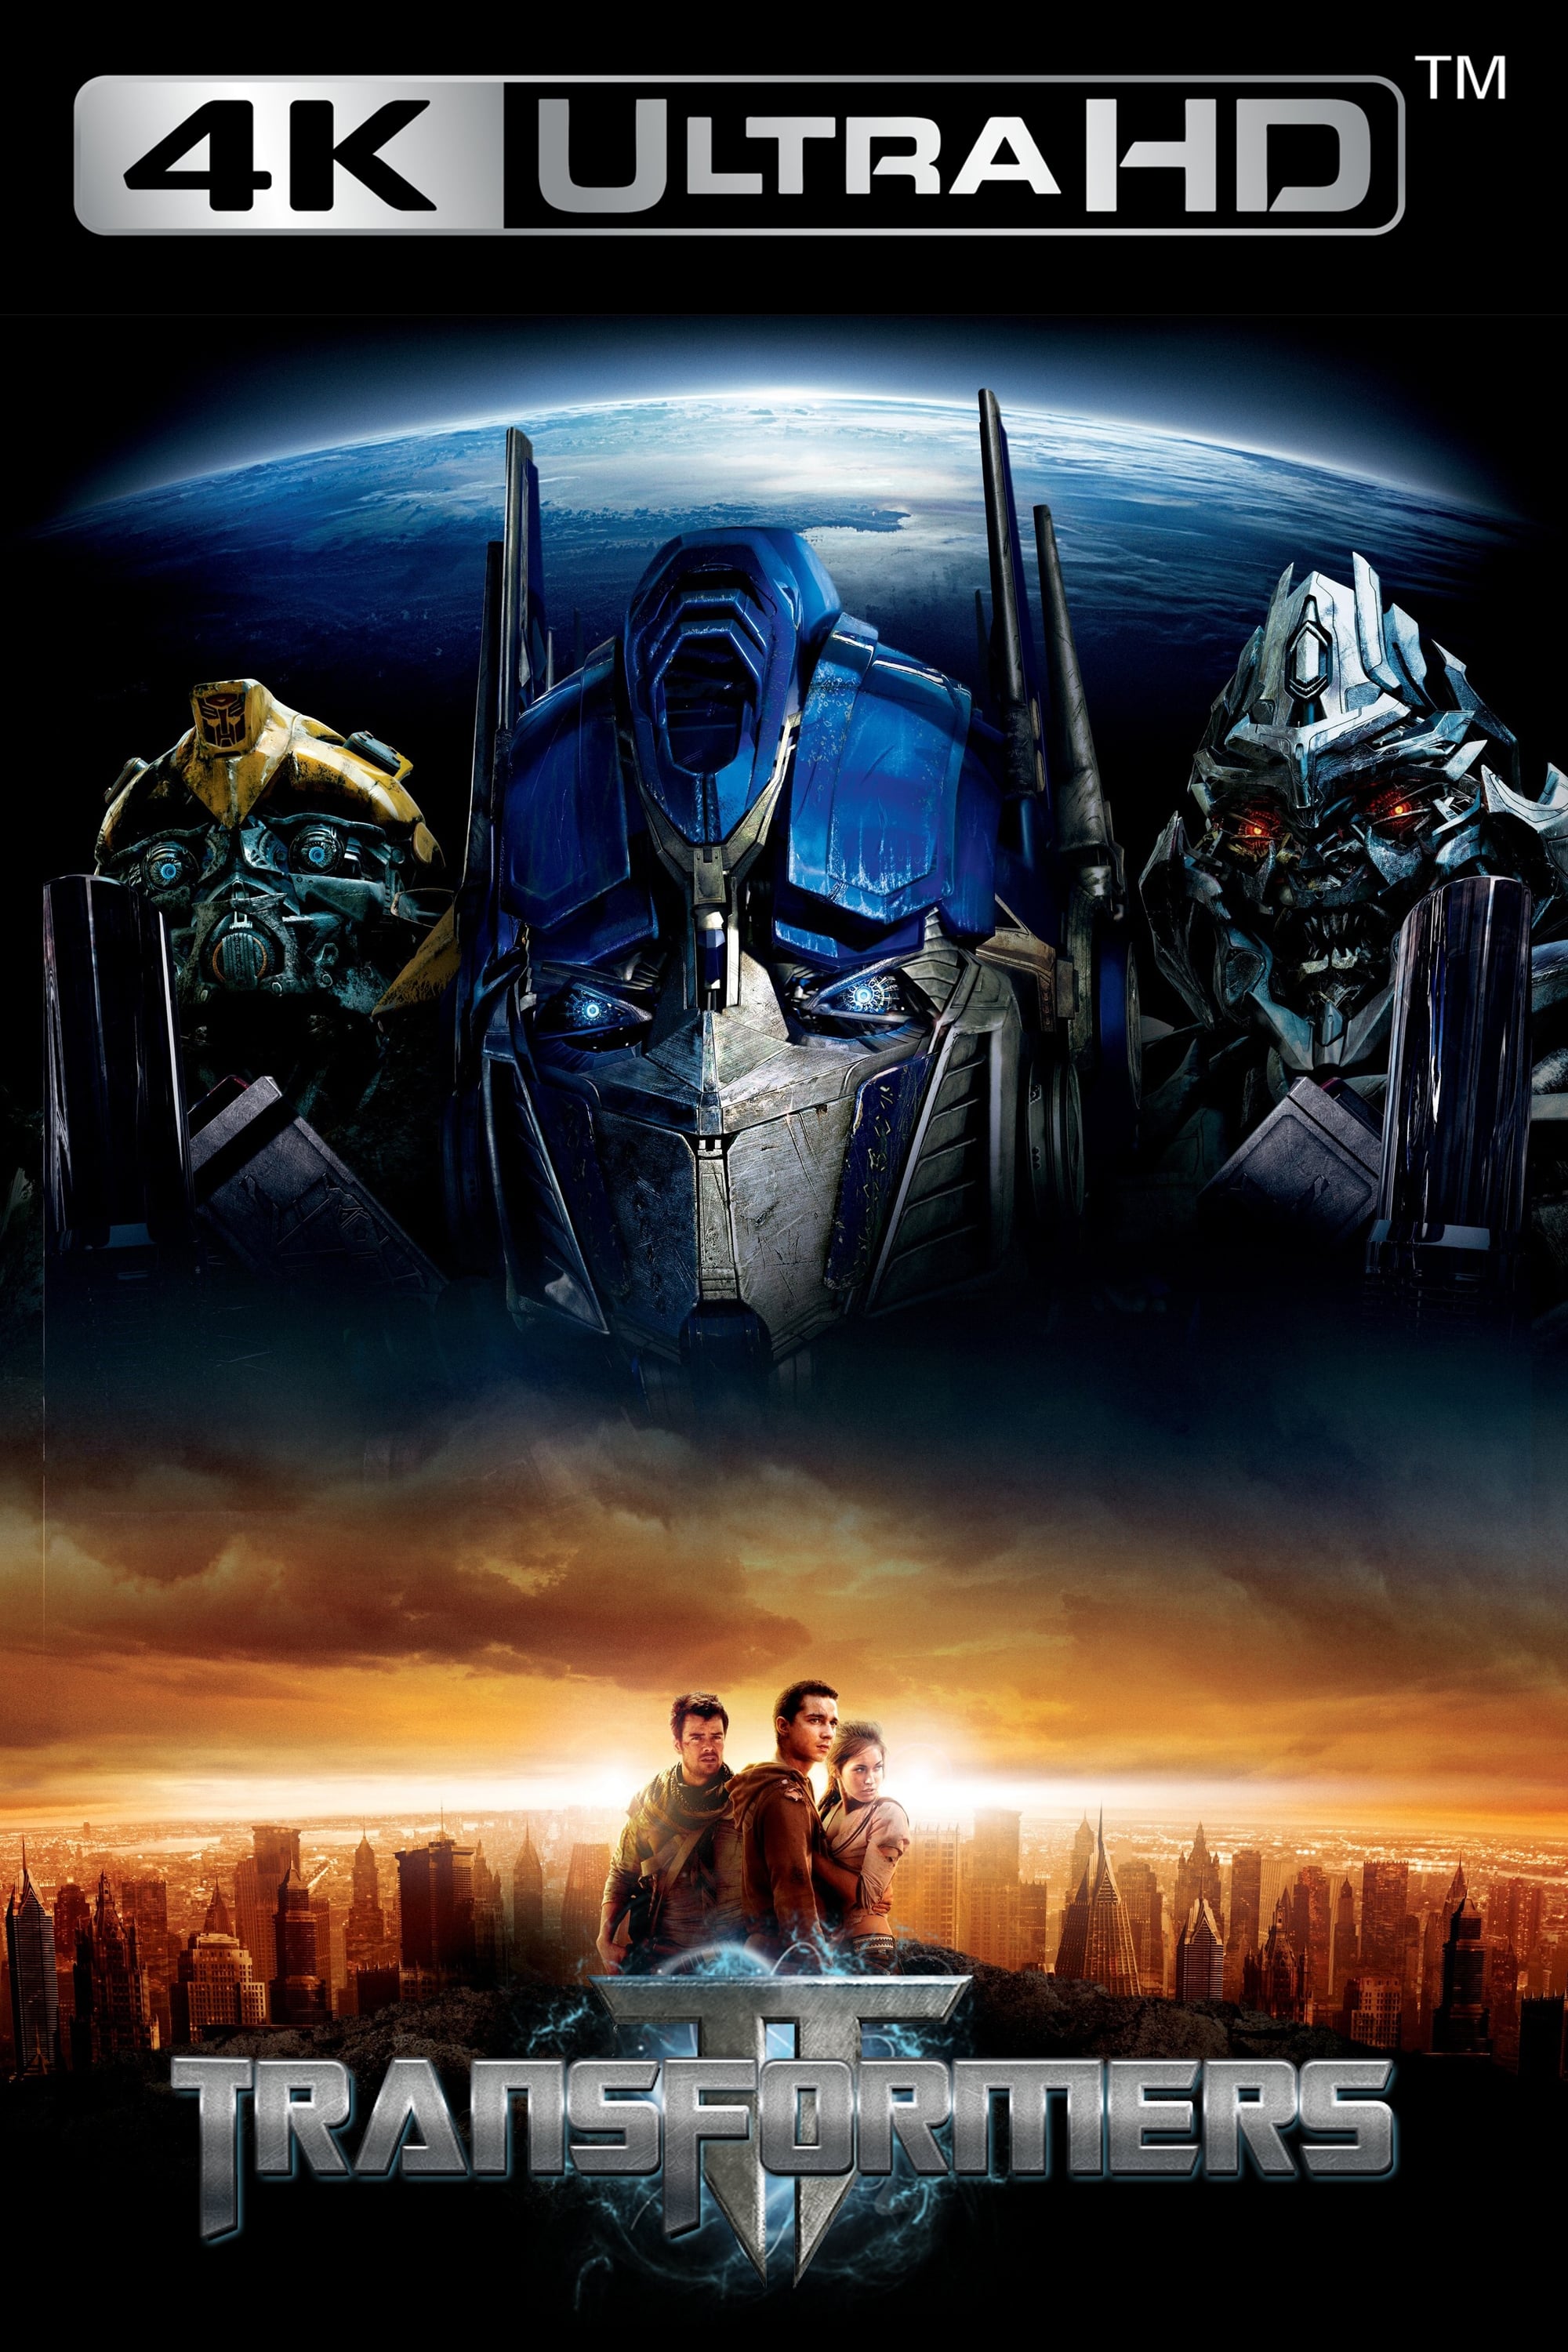 Transformers POSTER